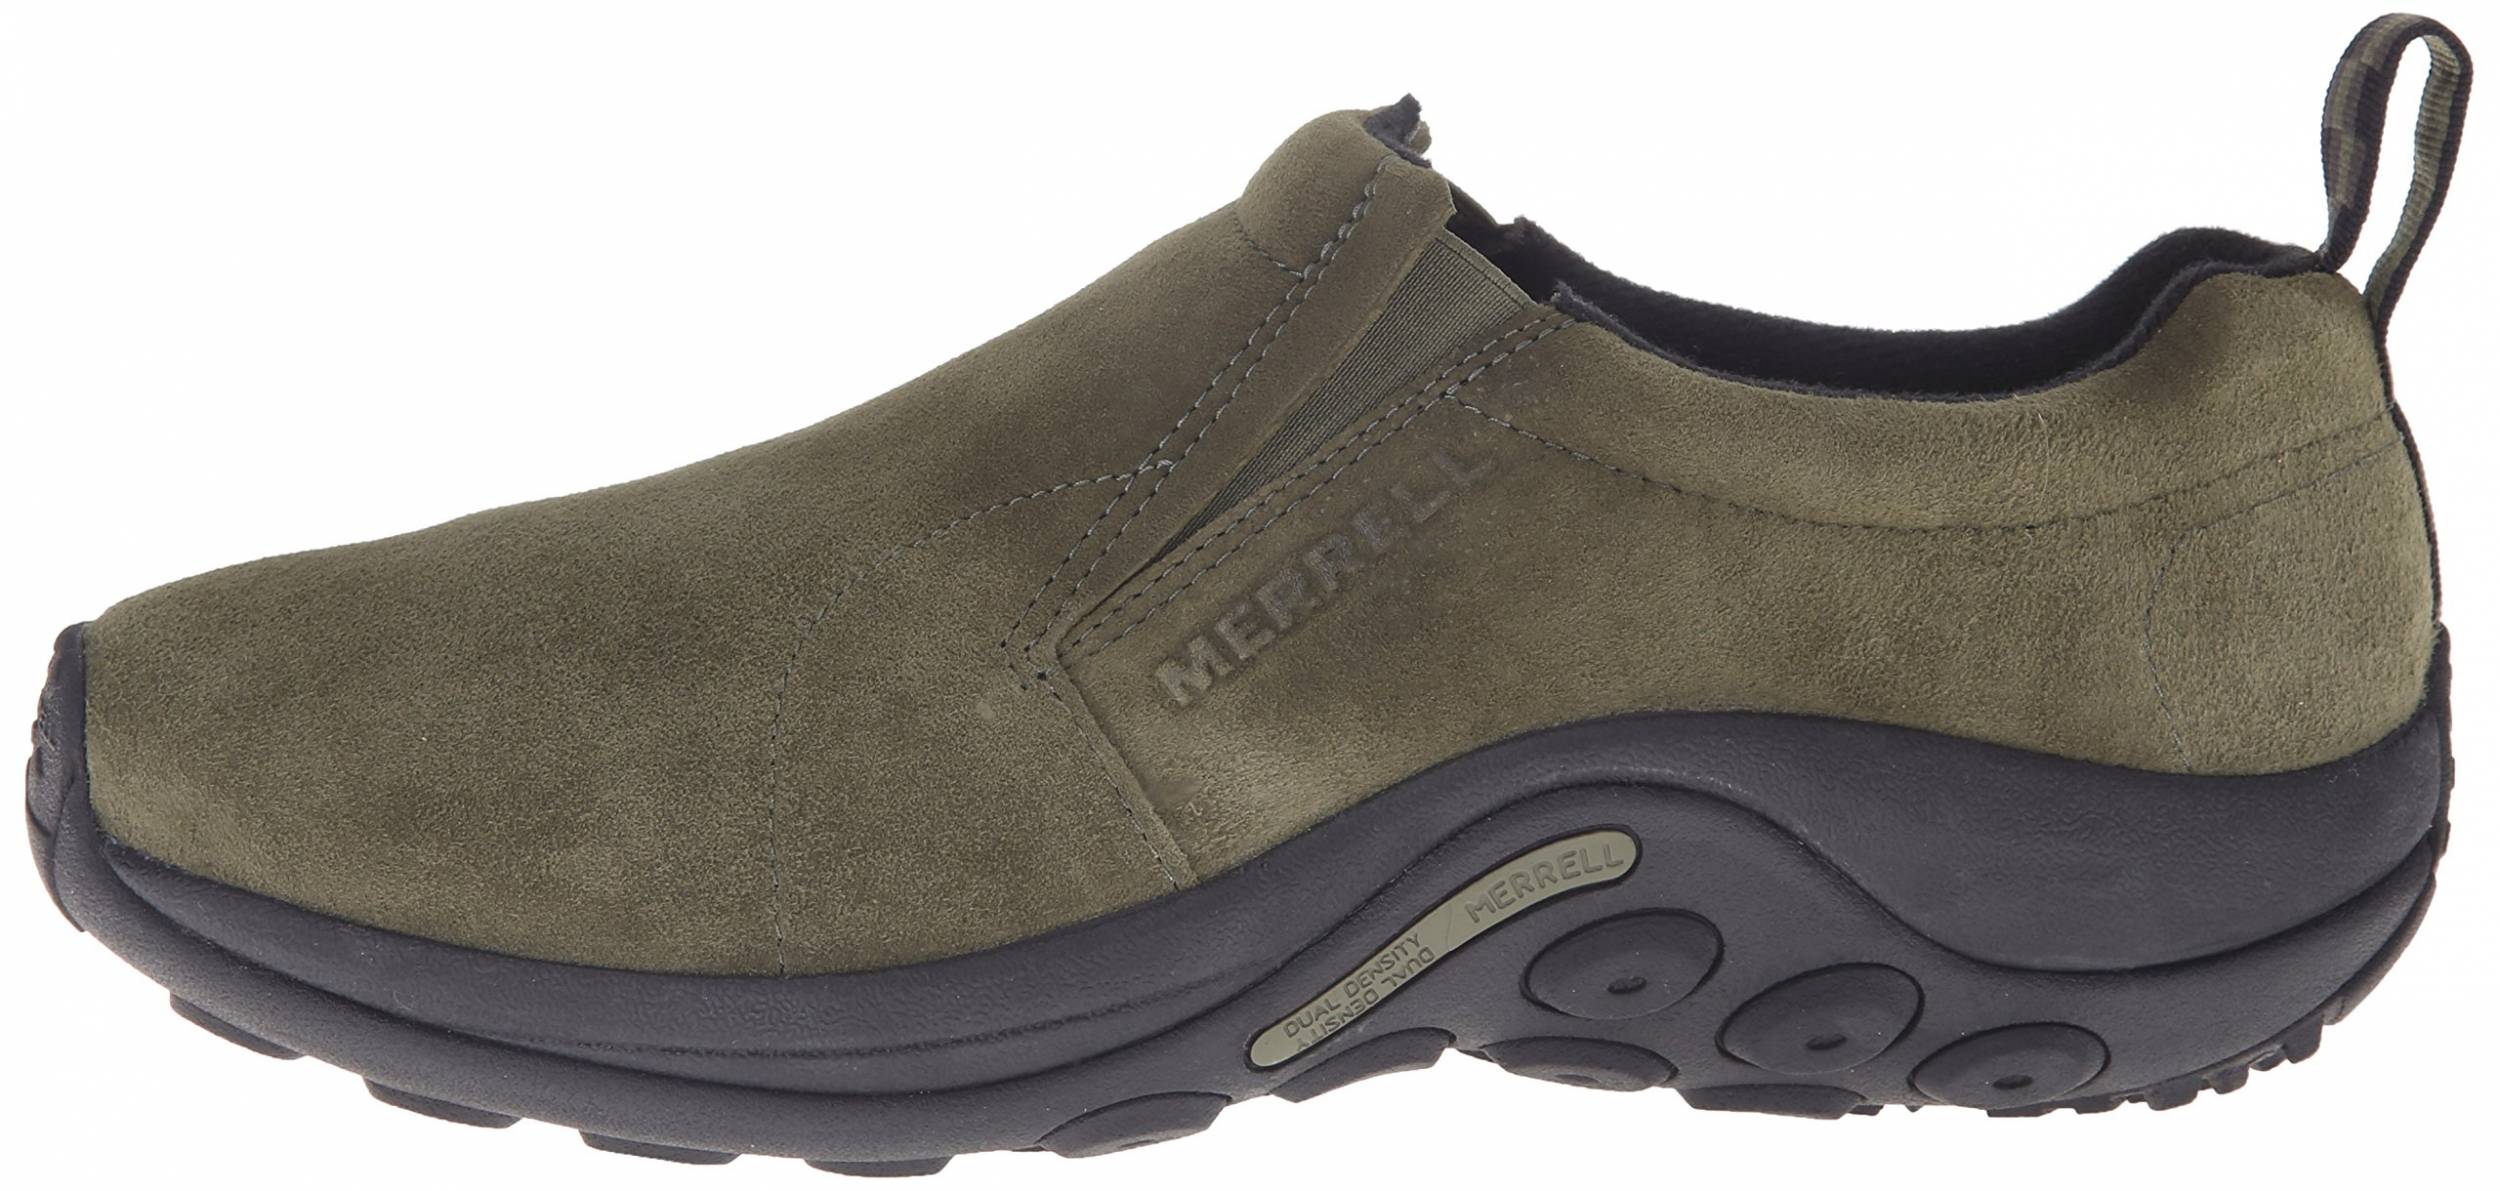 Save 45% on Merrell Sneakers (47 Models 